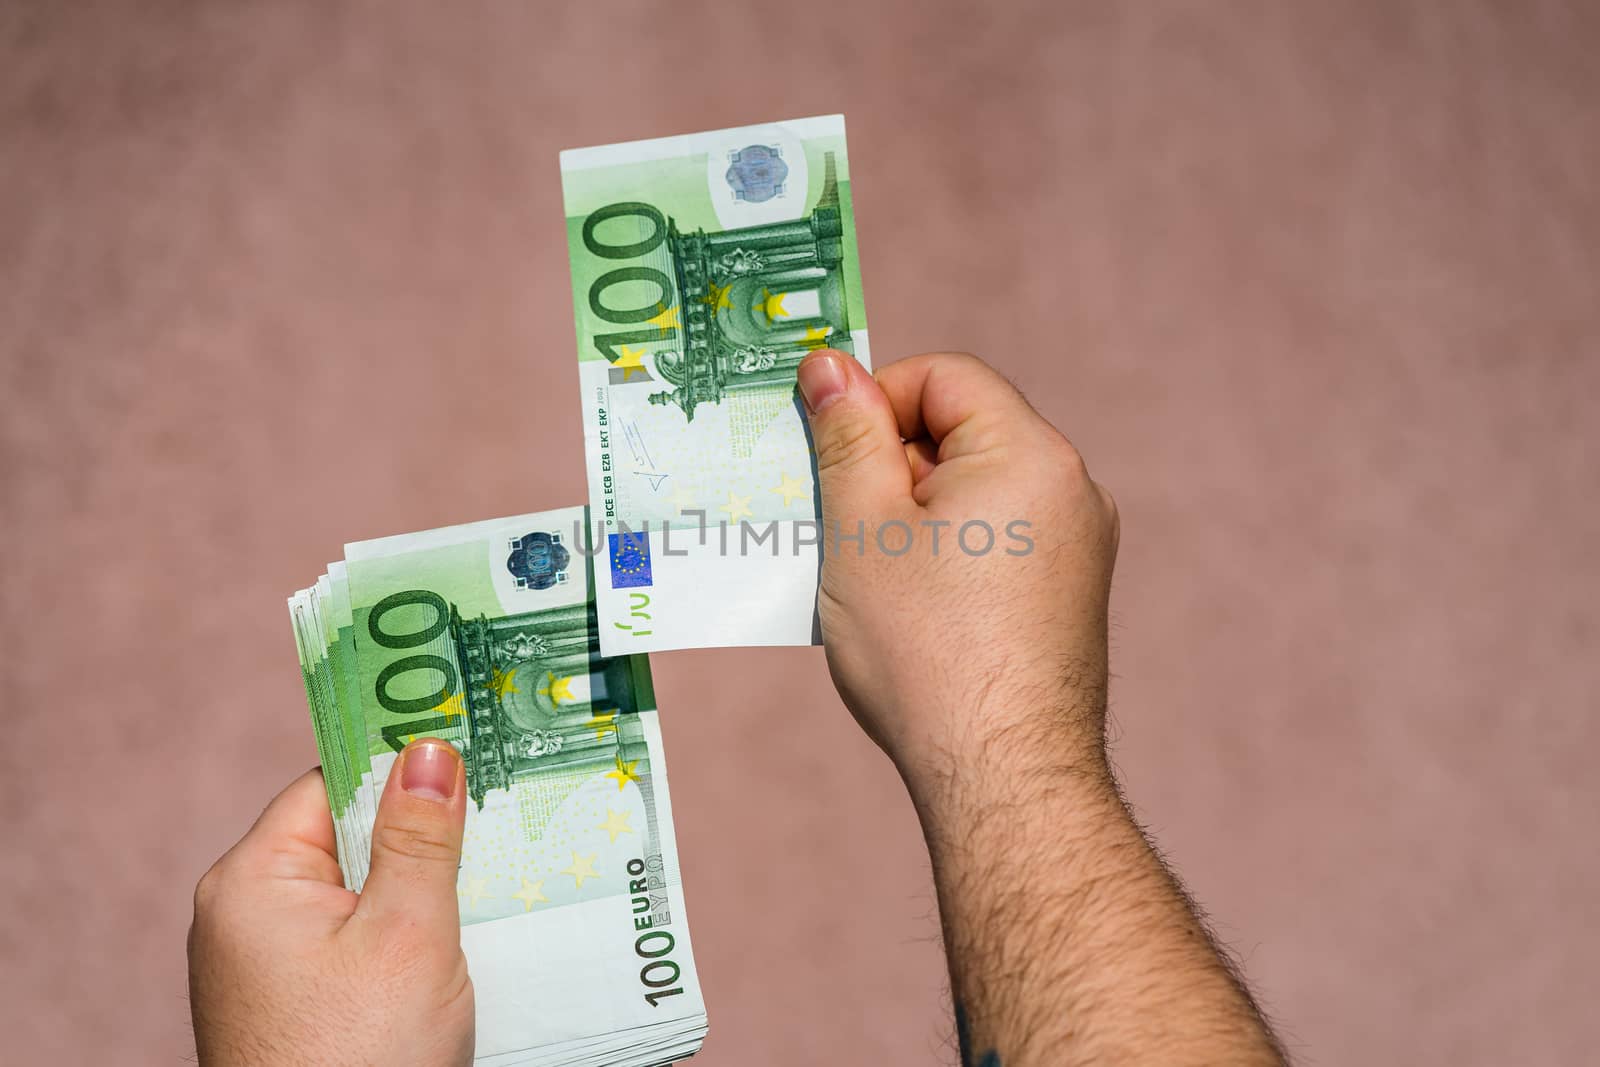 Hand holding and showing euro money or giving money. World money concept, 100 EURO banknotes EUR currency isolated. Concept of rich business people, saving or spending money.